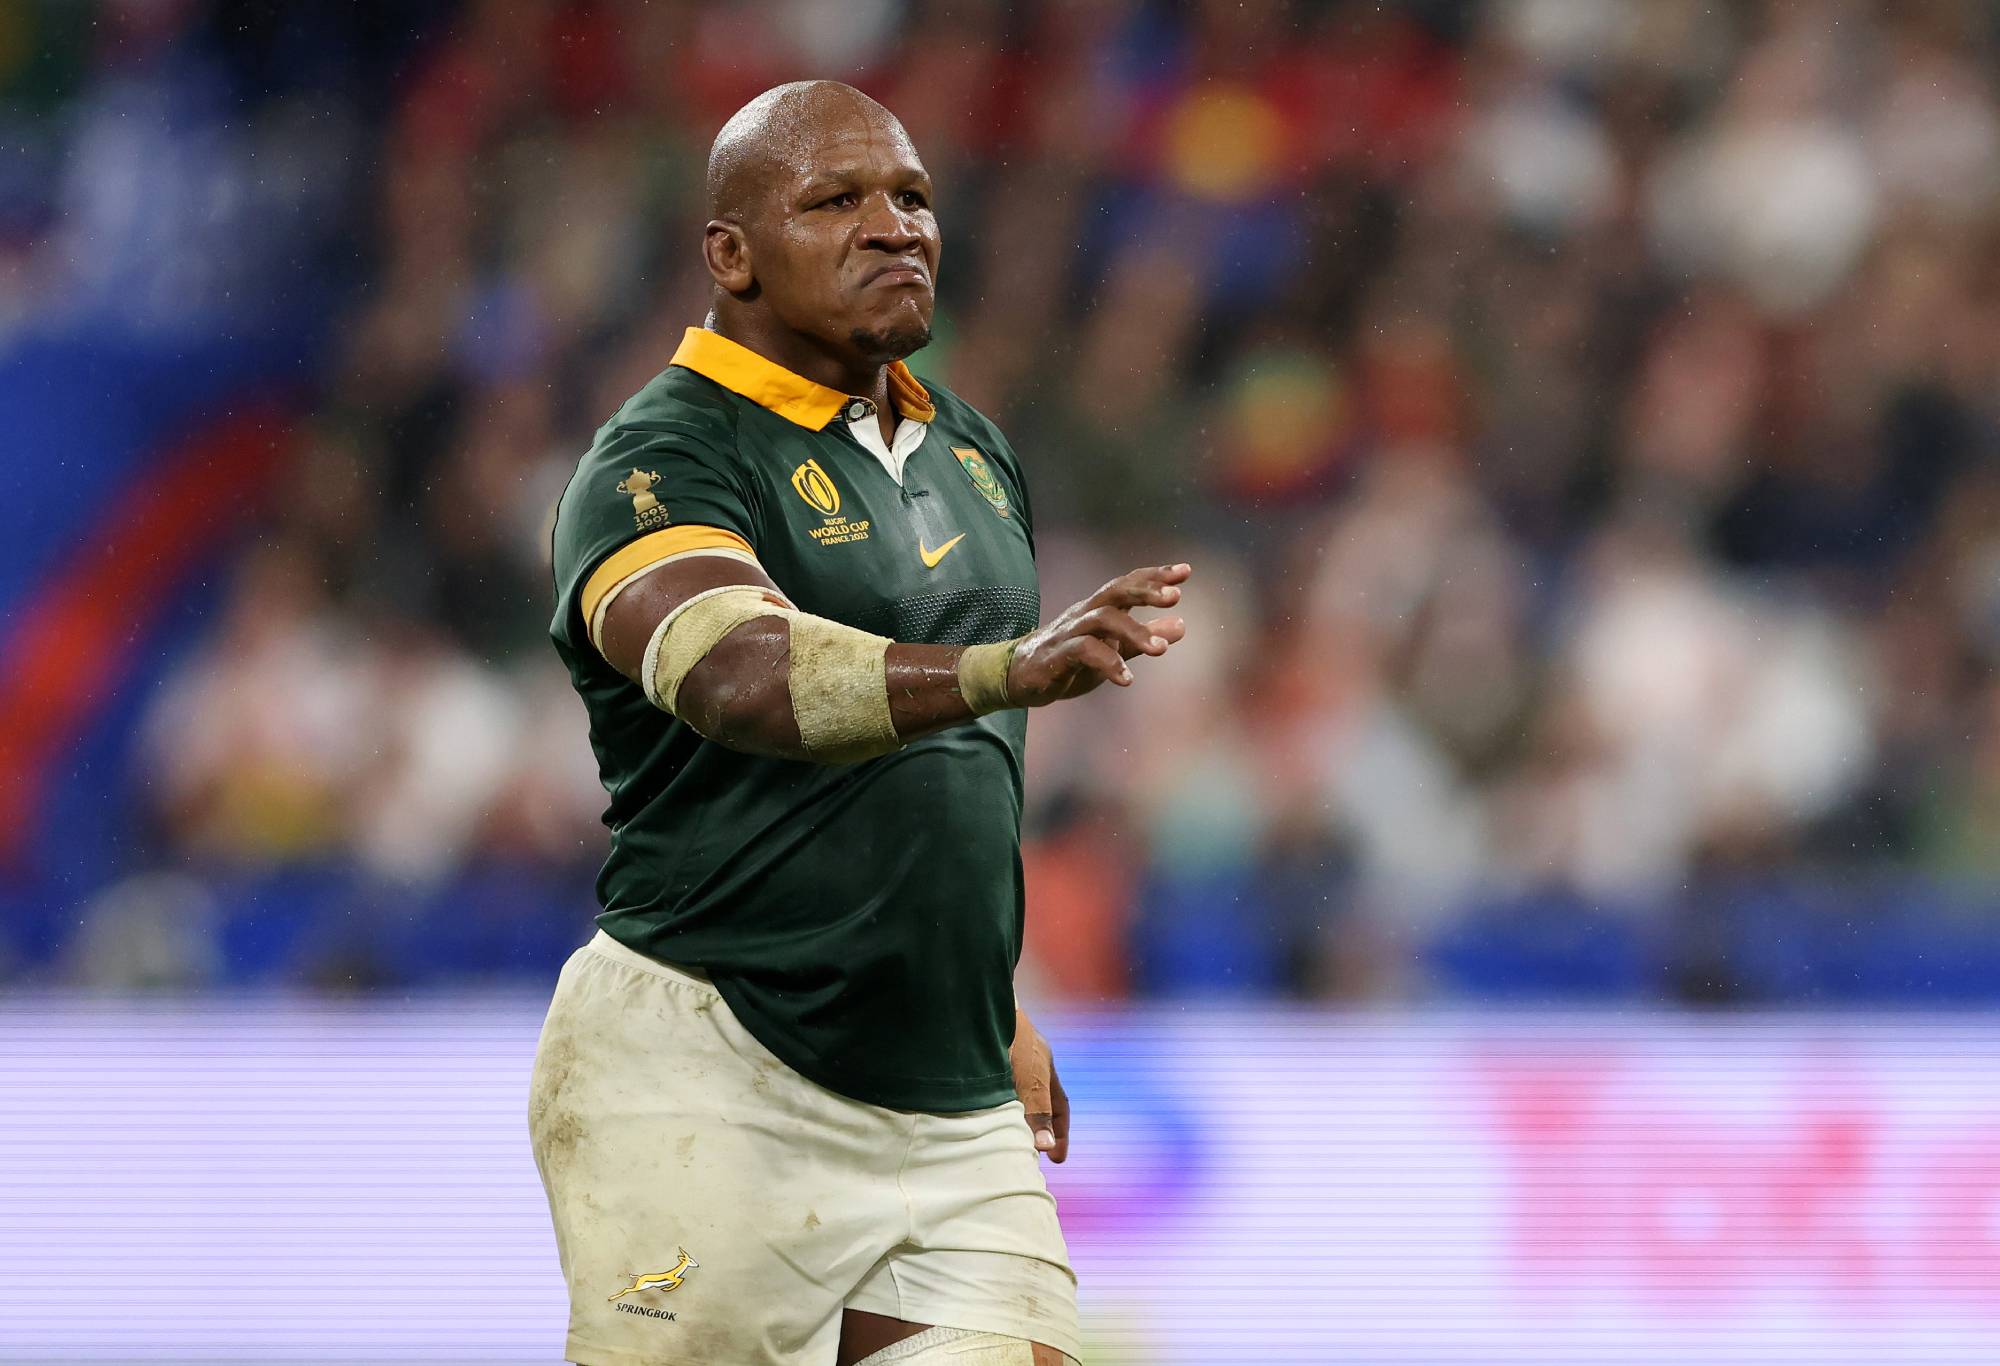 Mbongeni Mbonambi of South Africa reacts during the Rugby World Cup France 2023 match between England and South Africa at Stade de France on October 21, 2023 in Paris, France. (Photo by Paul Harding/Getty Images)